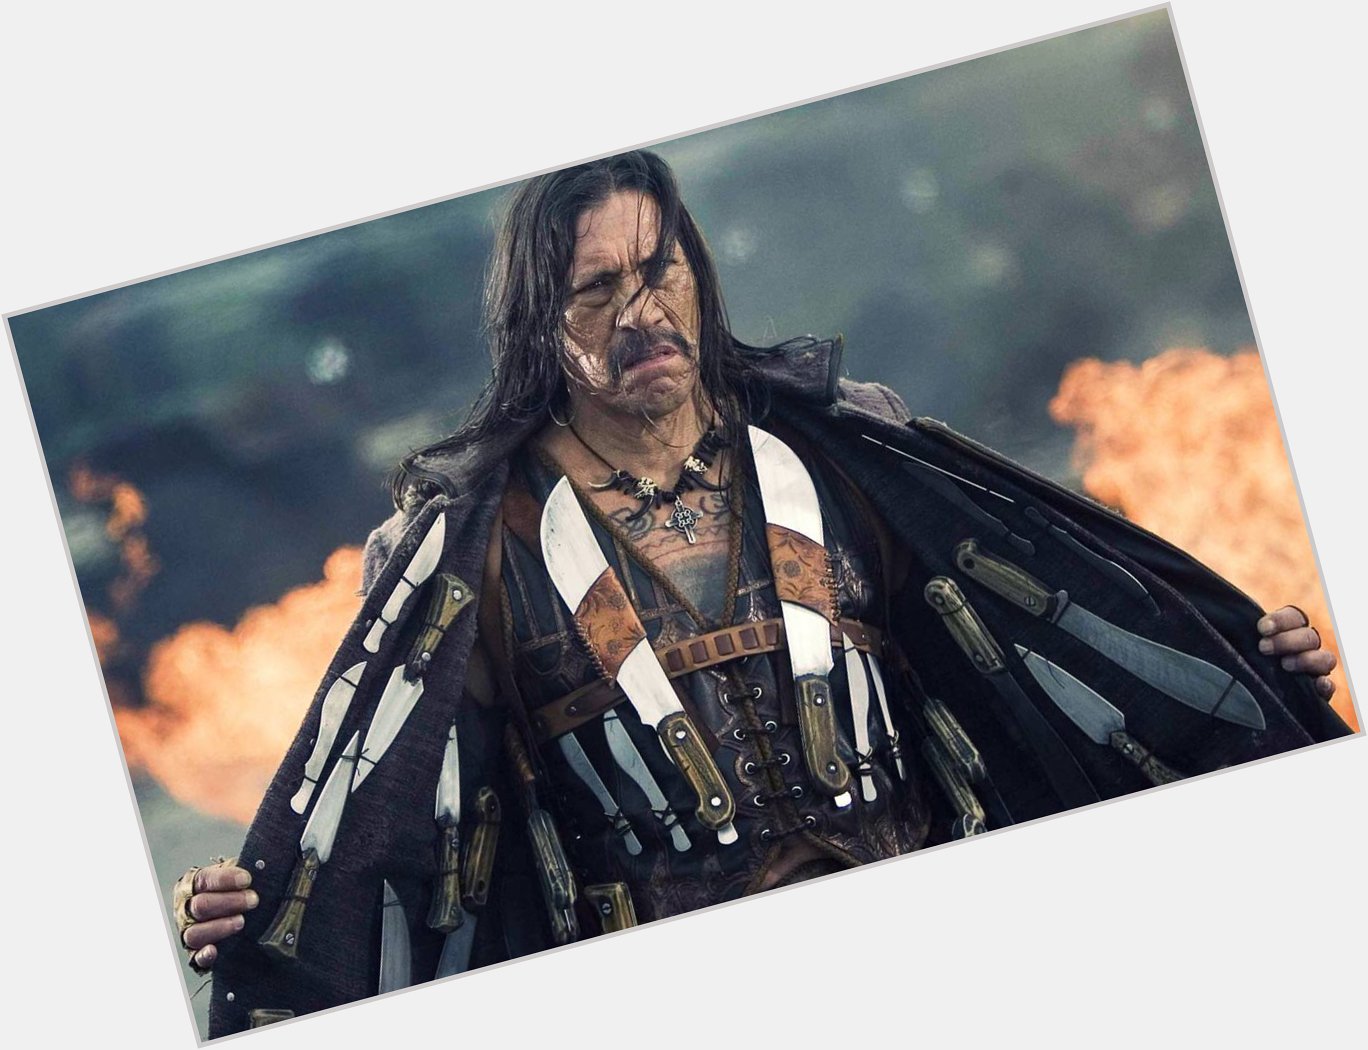 Happy birthday to Danny Trejo - 71 years young! 